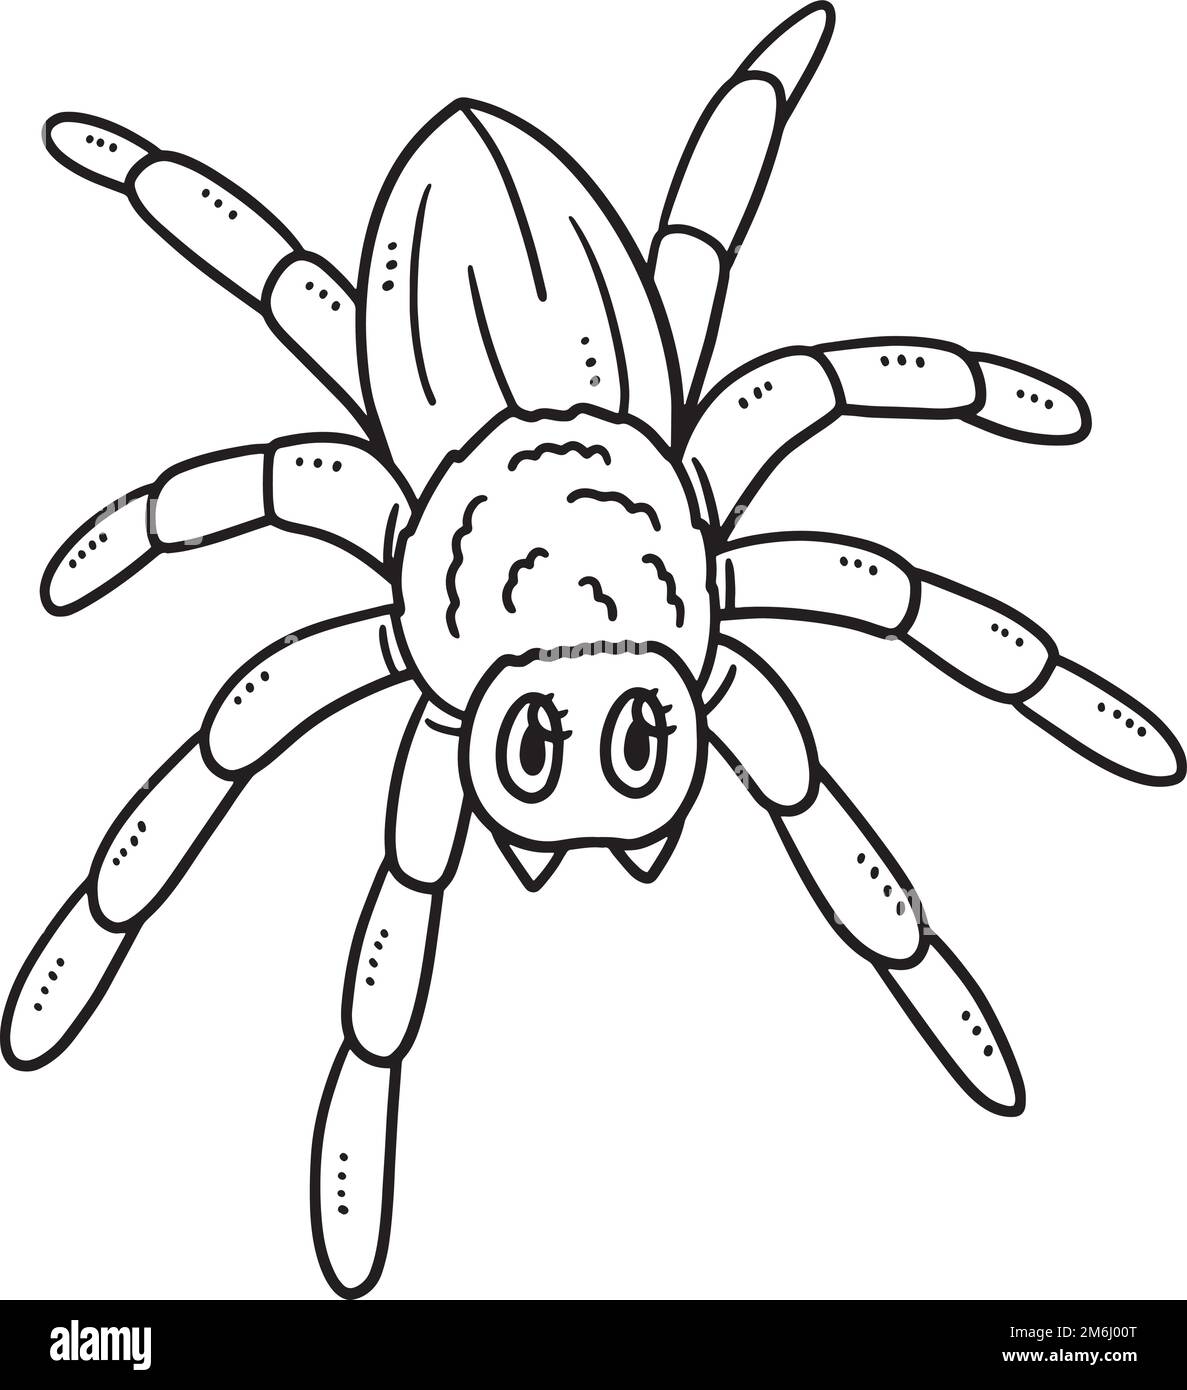 Spider drawing color cut out stock images pictures